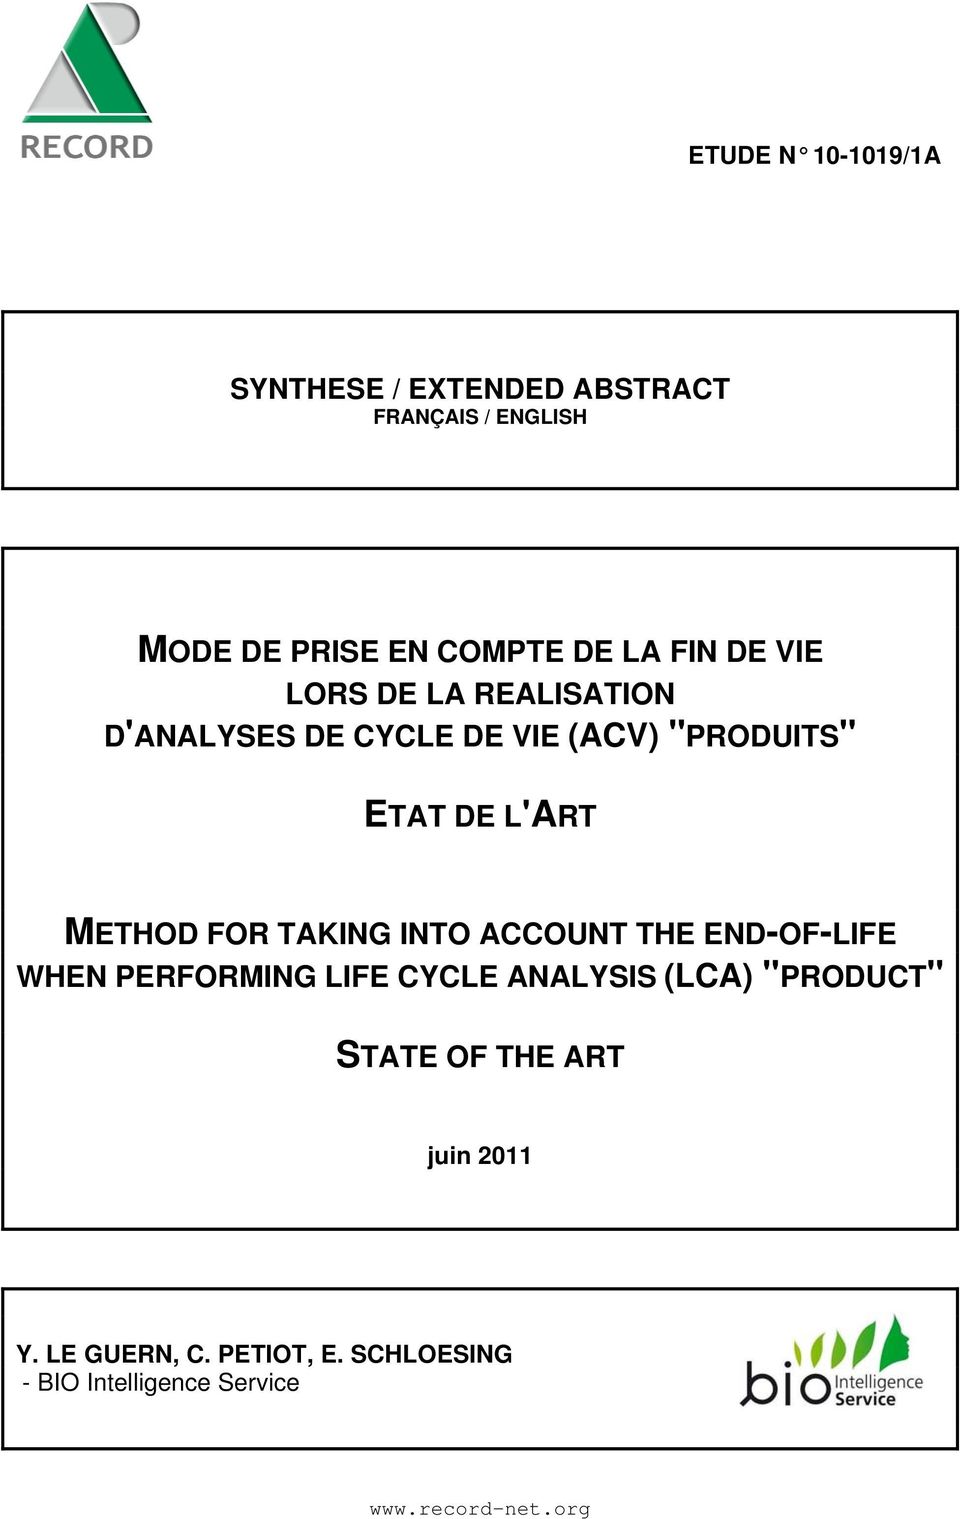 FOR TAKING INTO ACCOUNT THE END-OF-LIFE WHEN PERFORMING LIFE CYCLE ANALYSIS (LCA) "PRODUCT" STATE